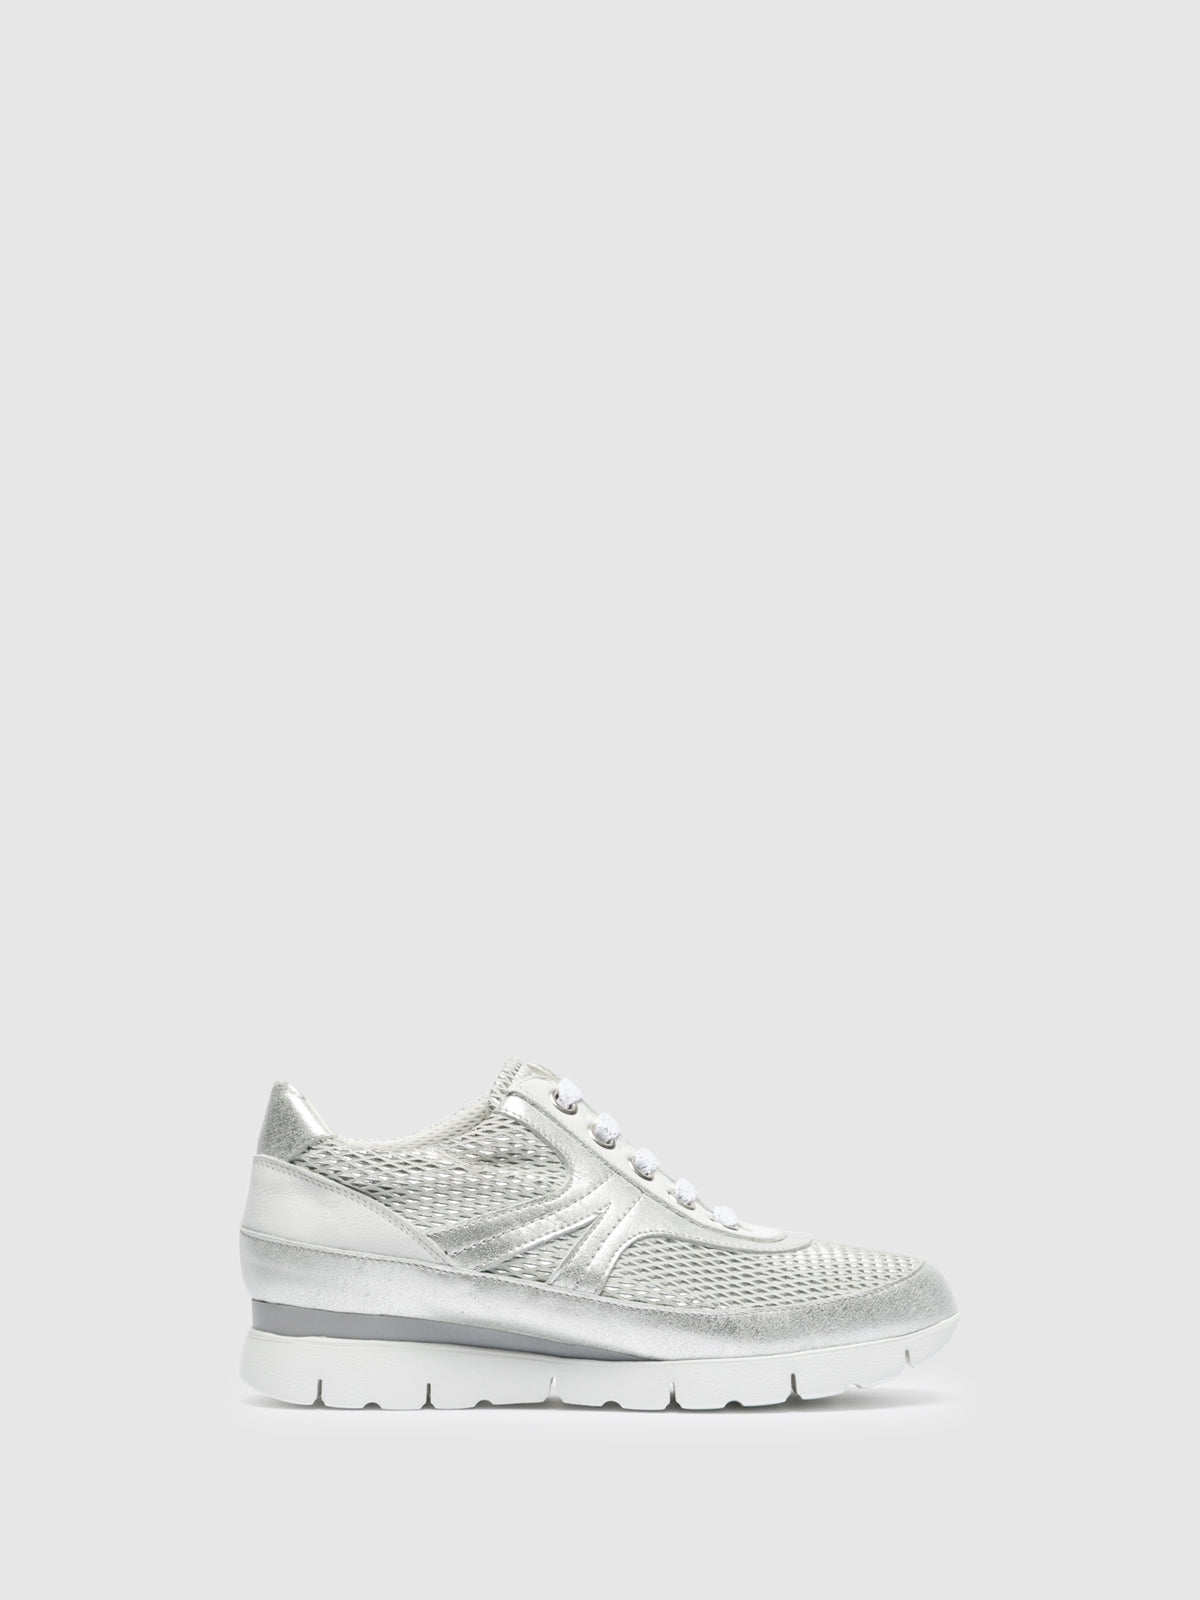 The Flexx White Lace-up Trainers